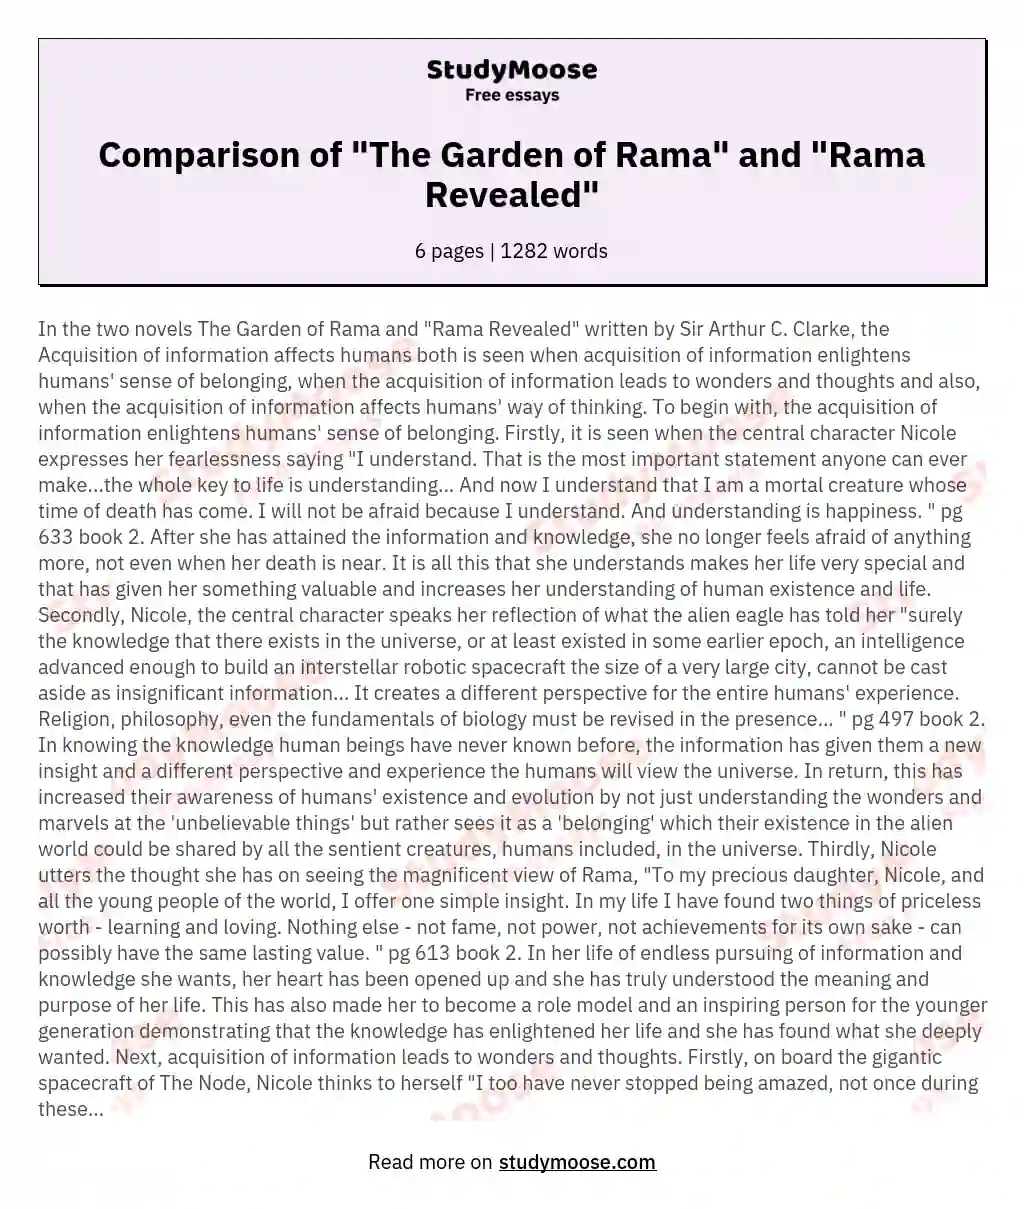 Comparison of "The Garden of Rama" and "Rama Revealed" essay